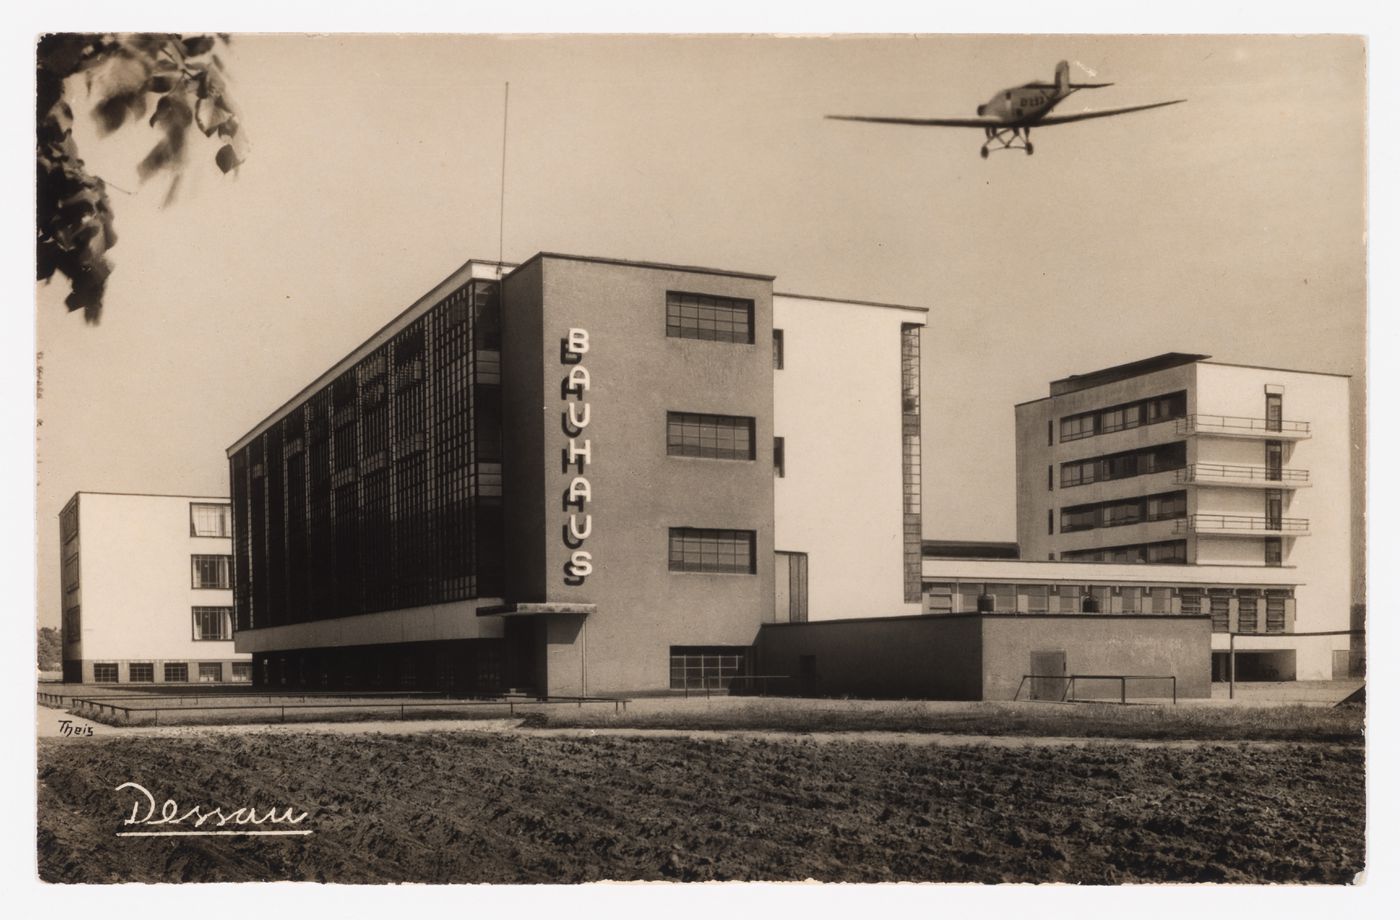 Exterior view of the Bauhaus building with a low-flying plane above, Dessau, Germany